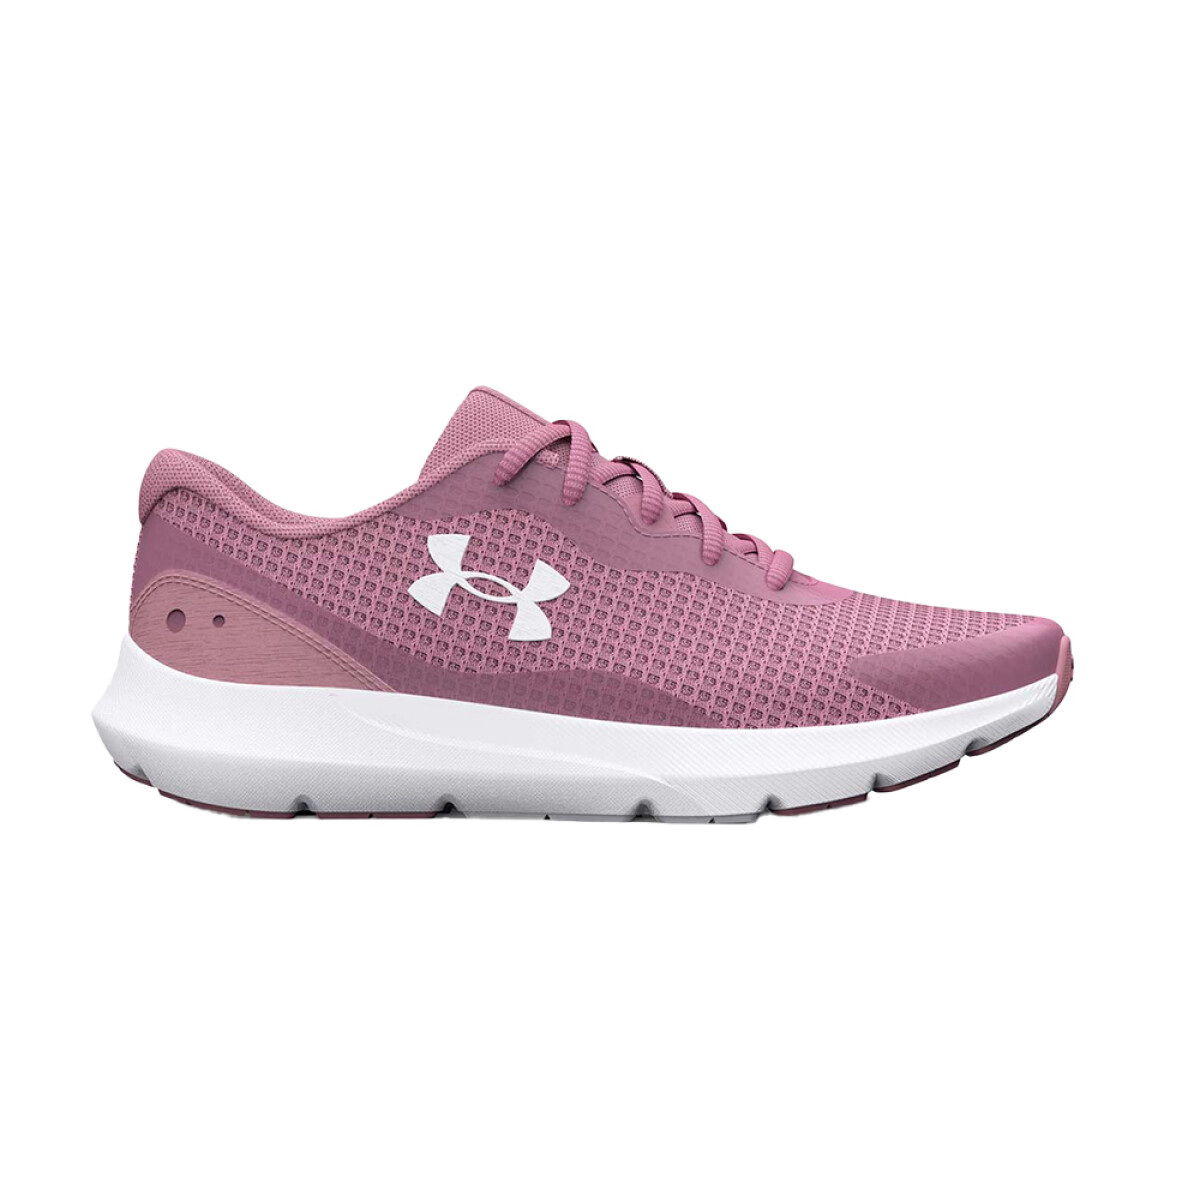 UNDER ARMOUR SURGE 3 - Pink 